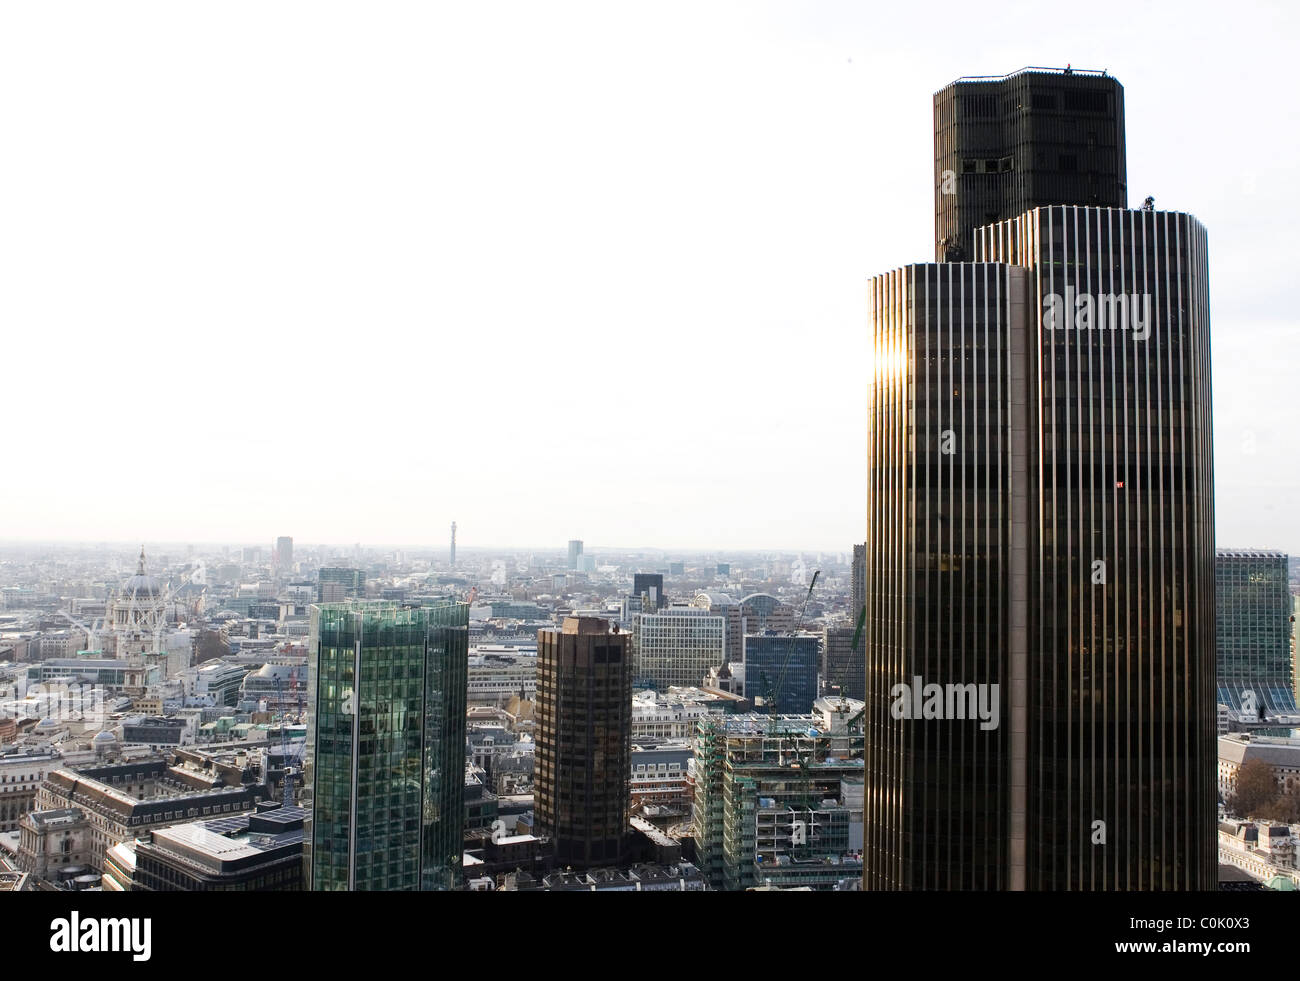 View of Tower 42, formerly Natwest Tower, with the city of London in the background. Stock Photo